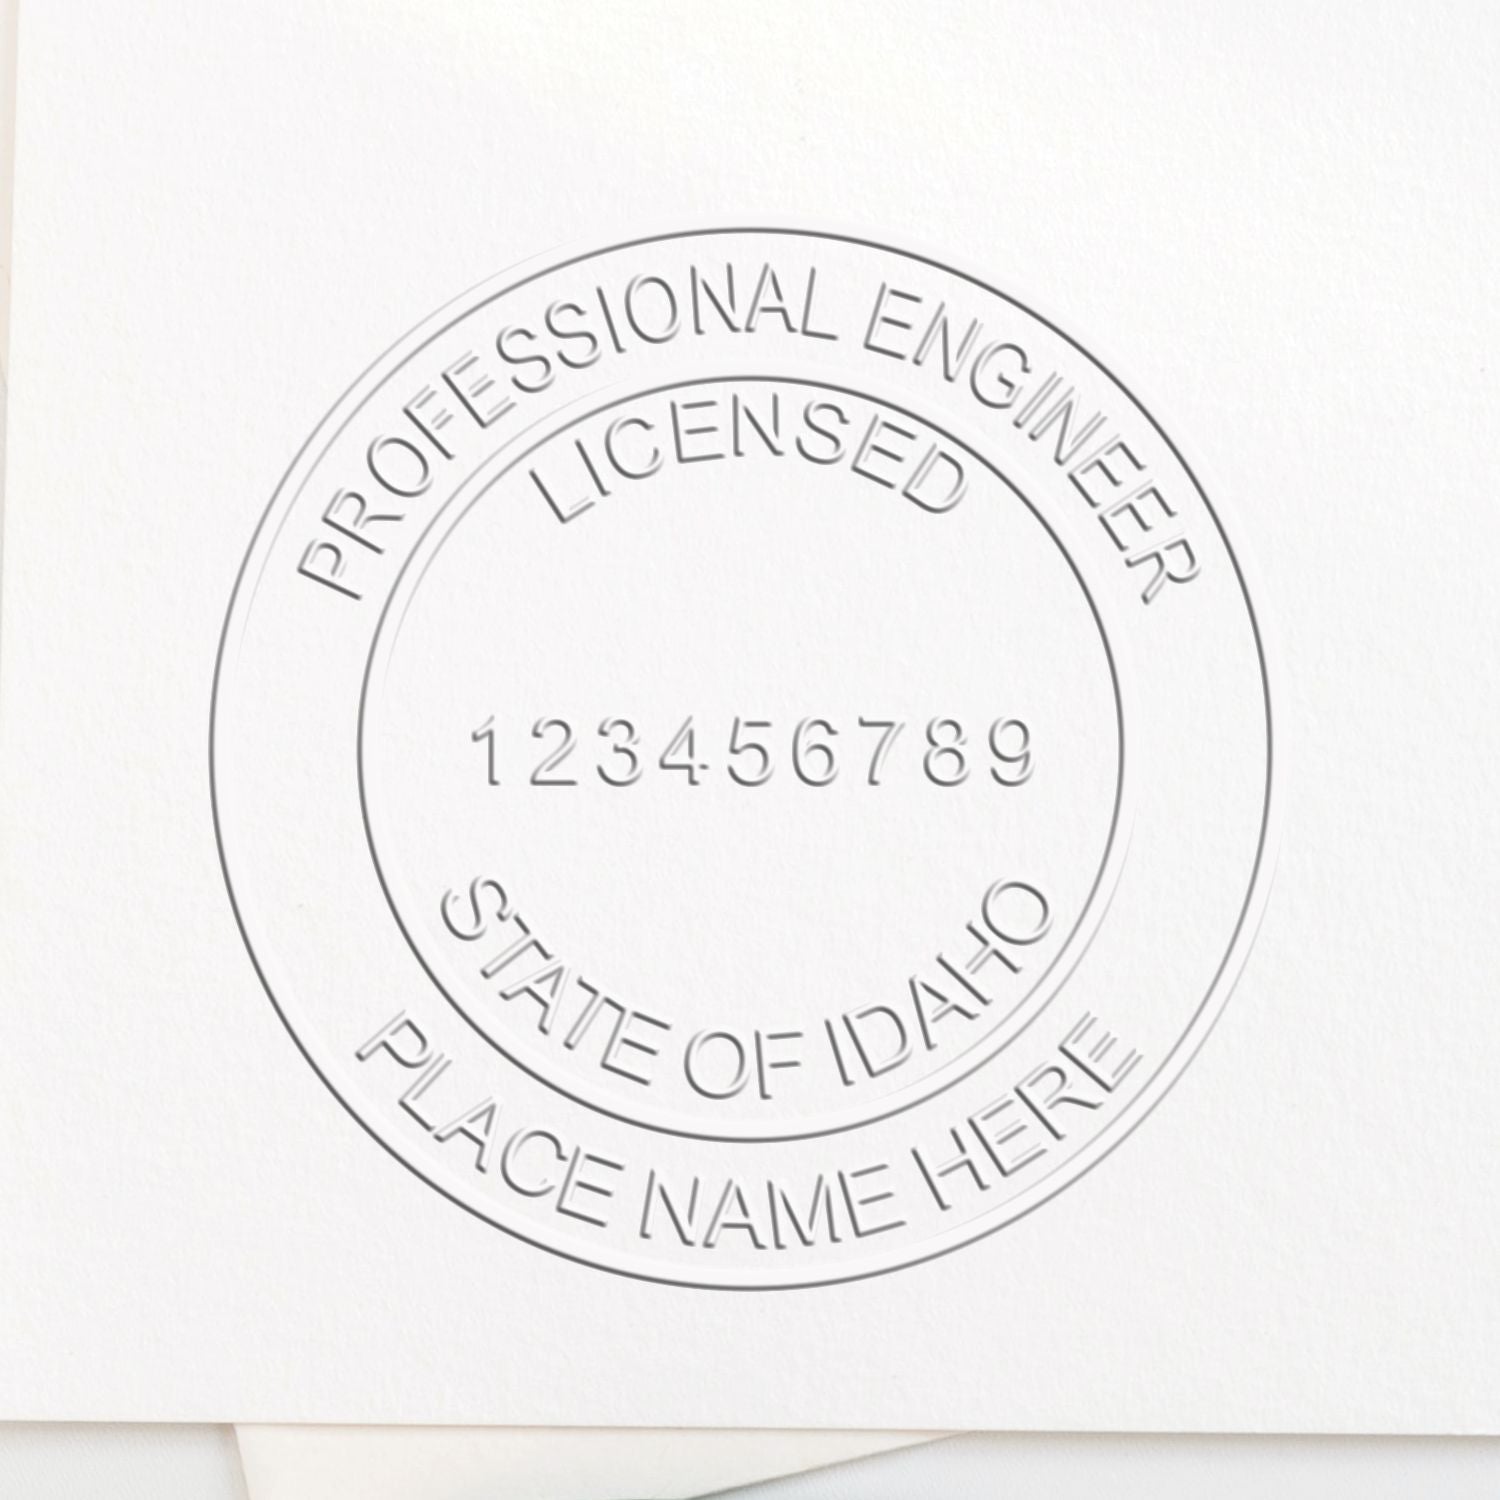 A stamped impression of the Soft Idaho Professional Engineer Seal in this stylish lifestyle photo, setting the tone for a unique and personalized product.